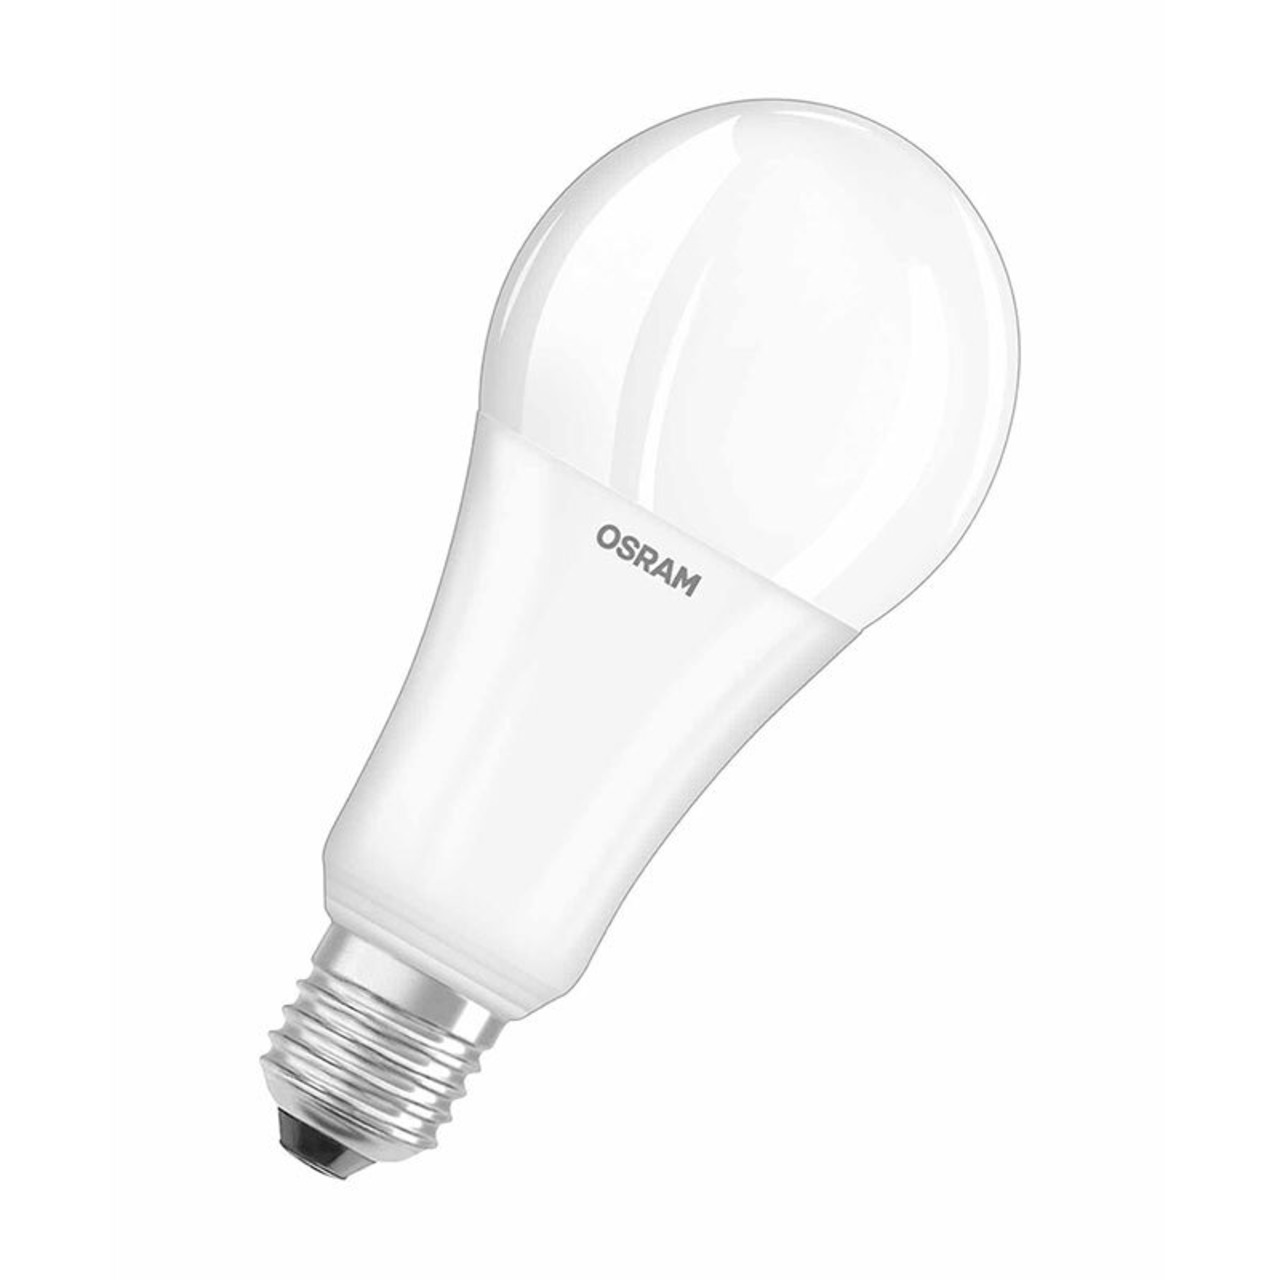 OSRAM LED STAR 19-W-LED-Lampe E27- warmweiss unter Beleuchtung